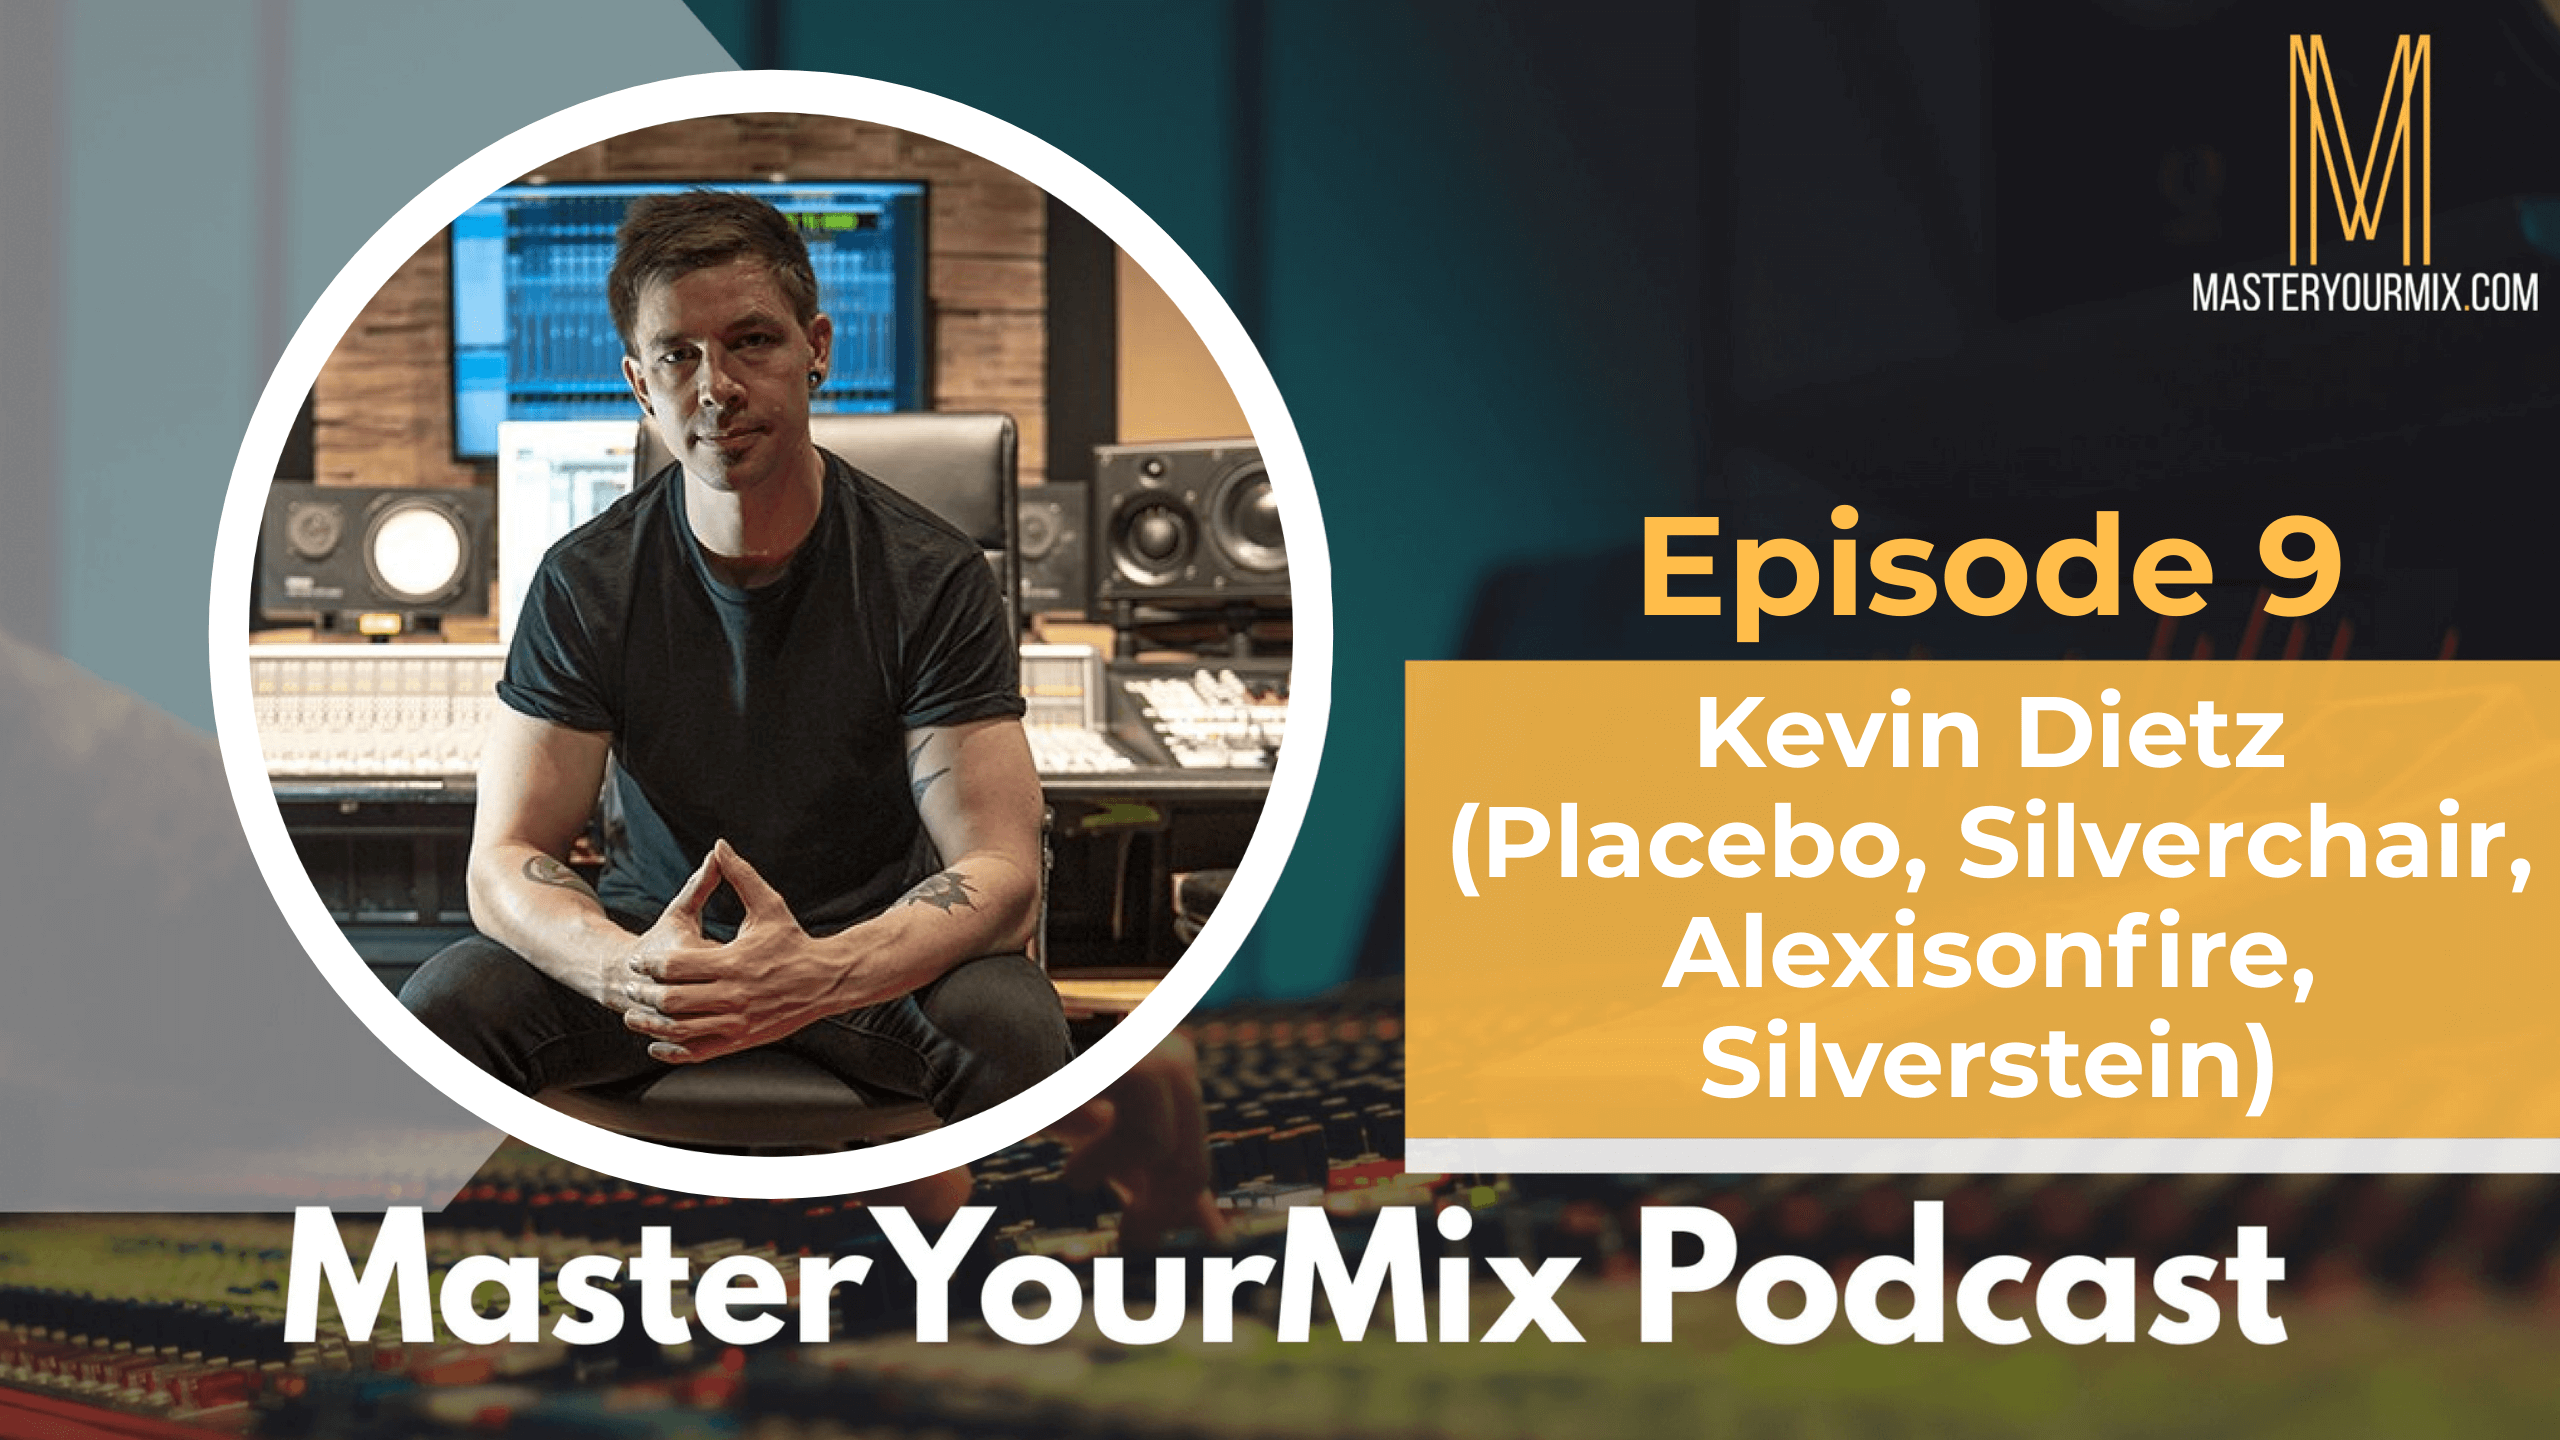 master your mix podcast, ep 9 kevin dietz